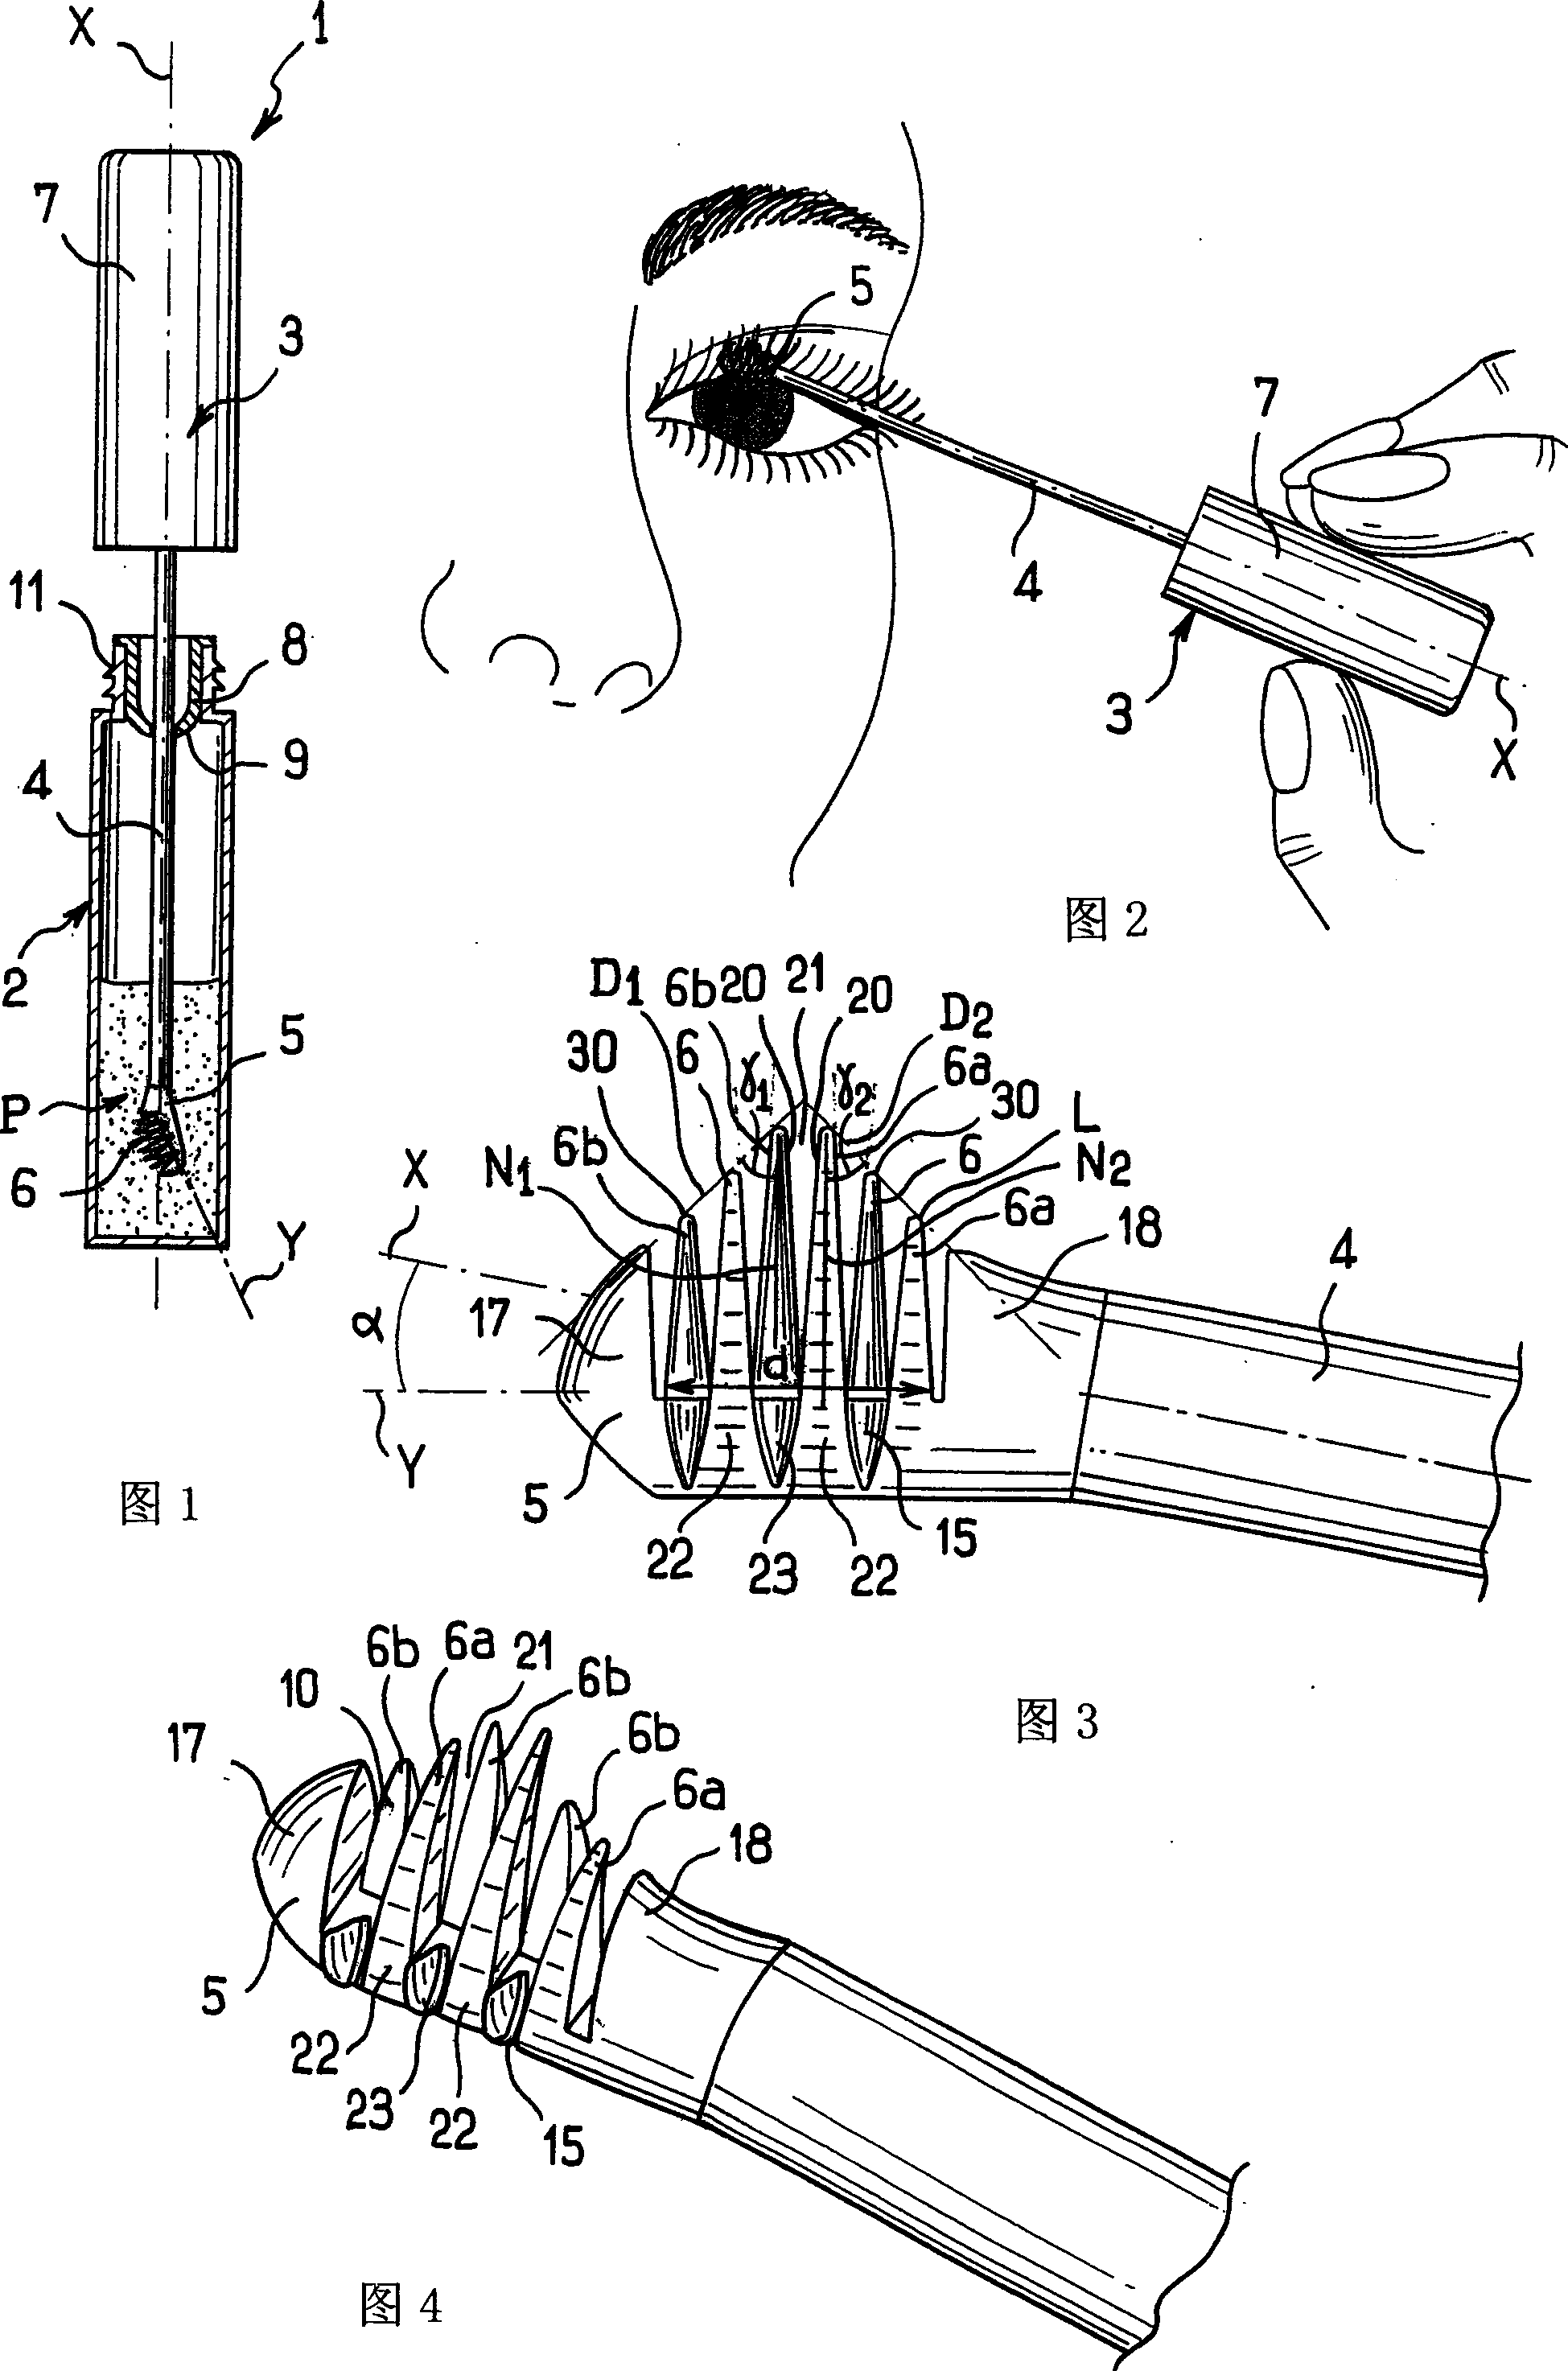 Container and applicator for applying a product on eyelash or eyebrow, in particular mascara